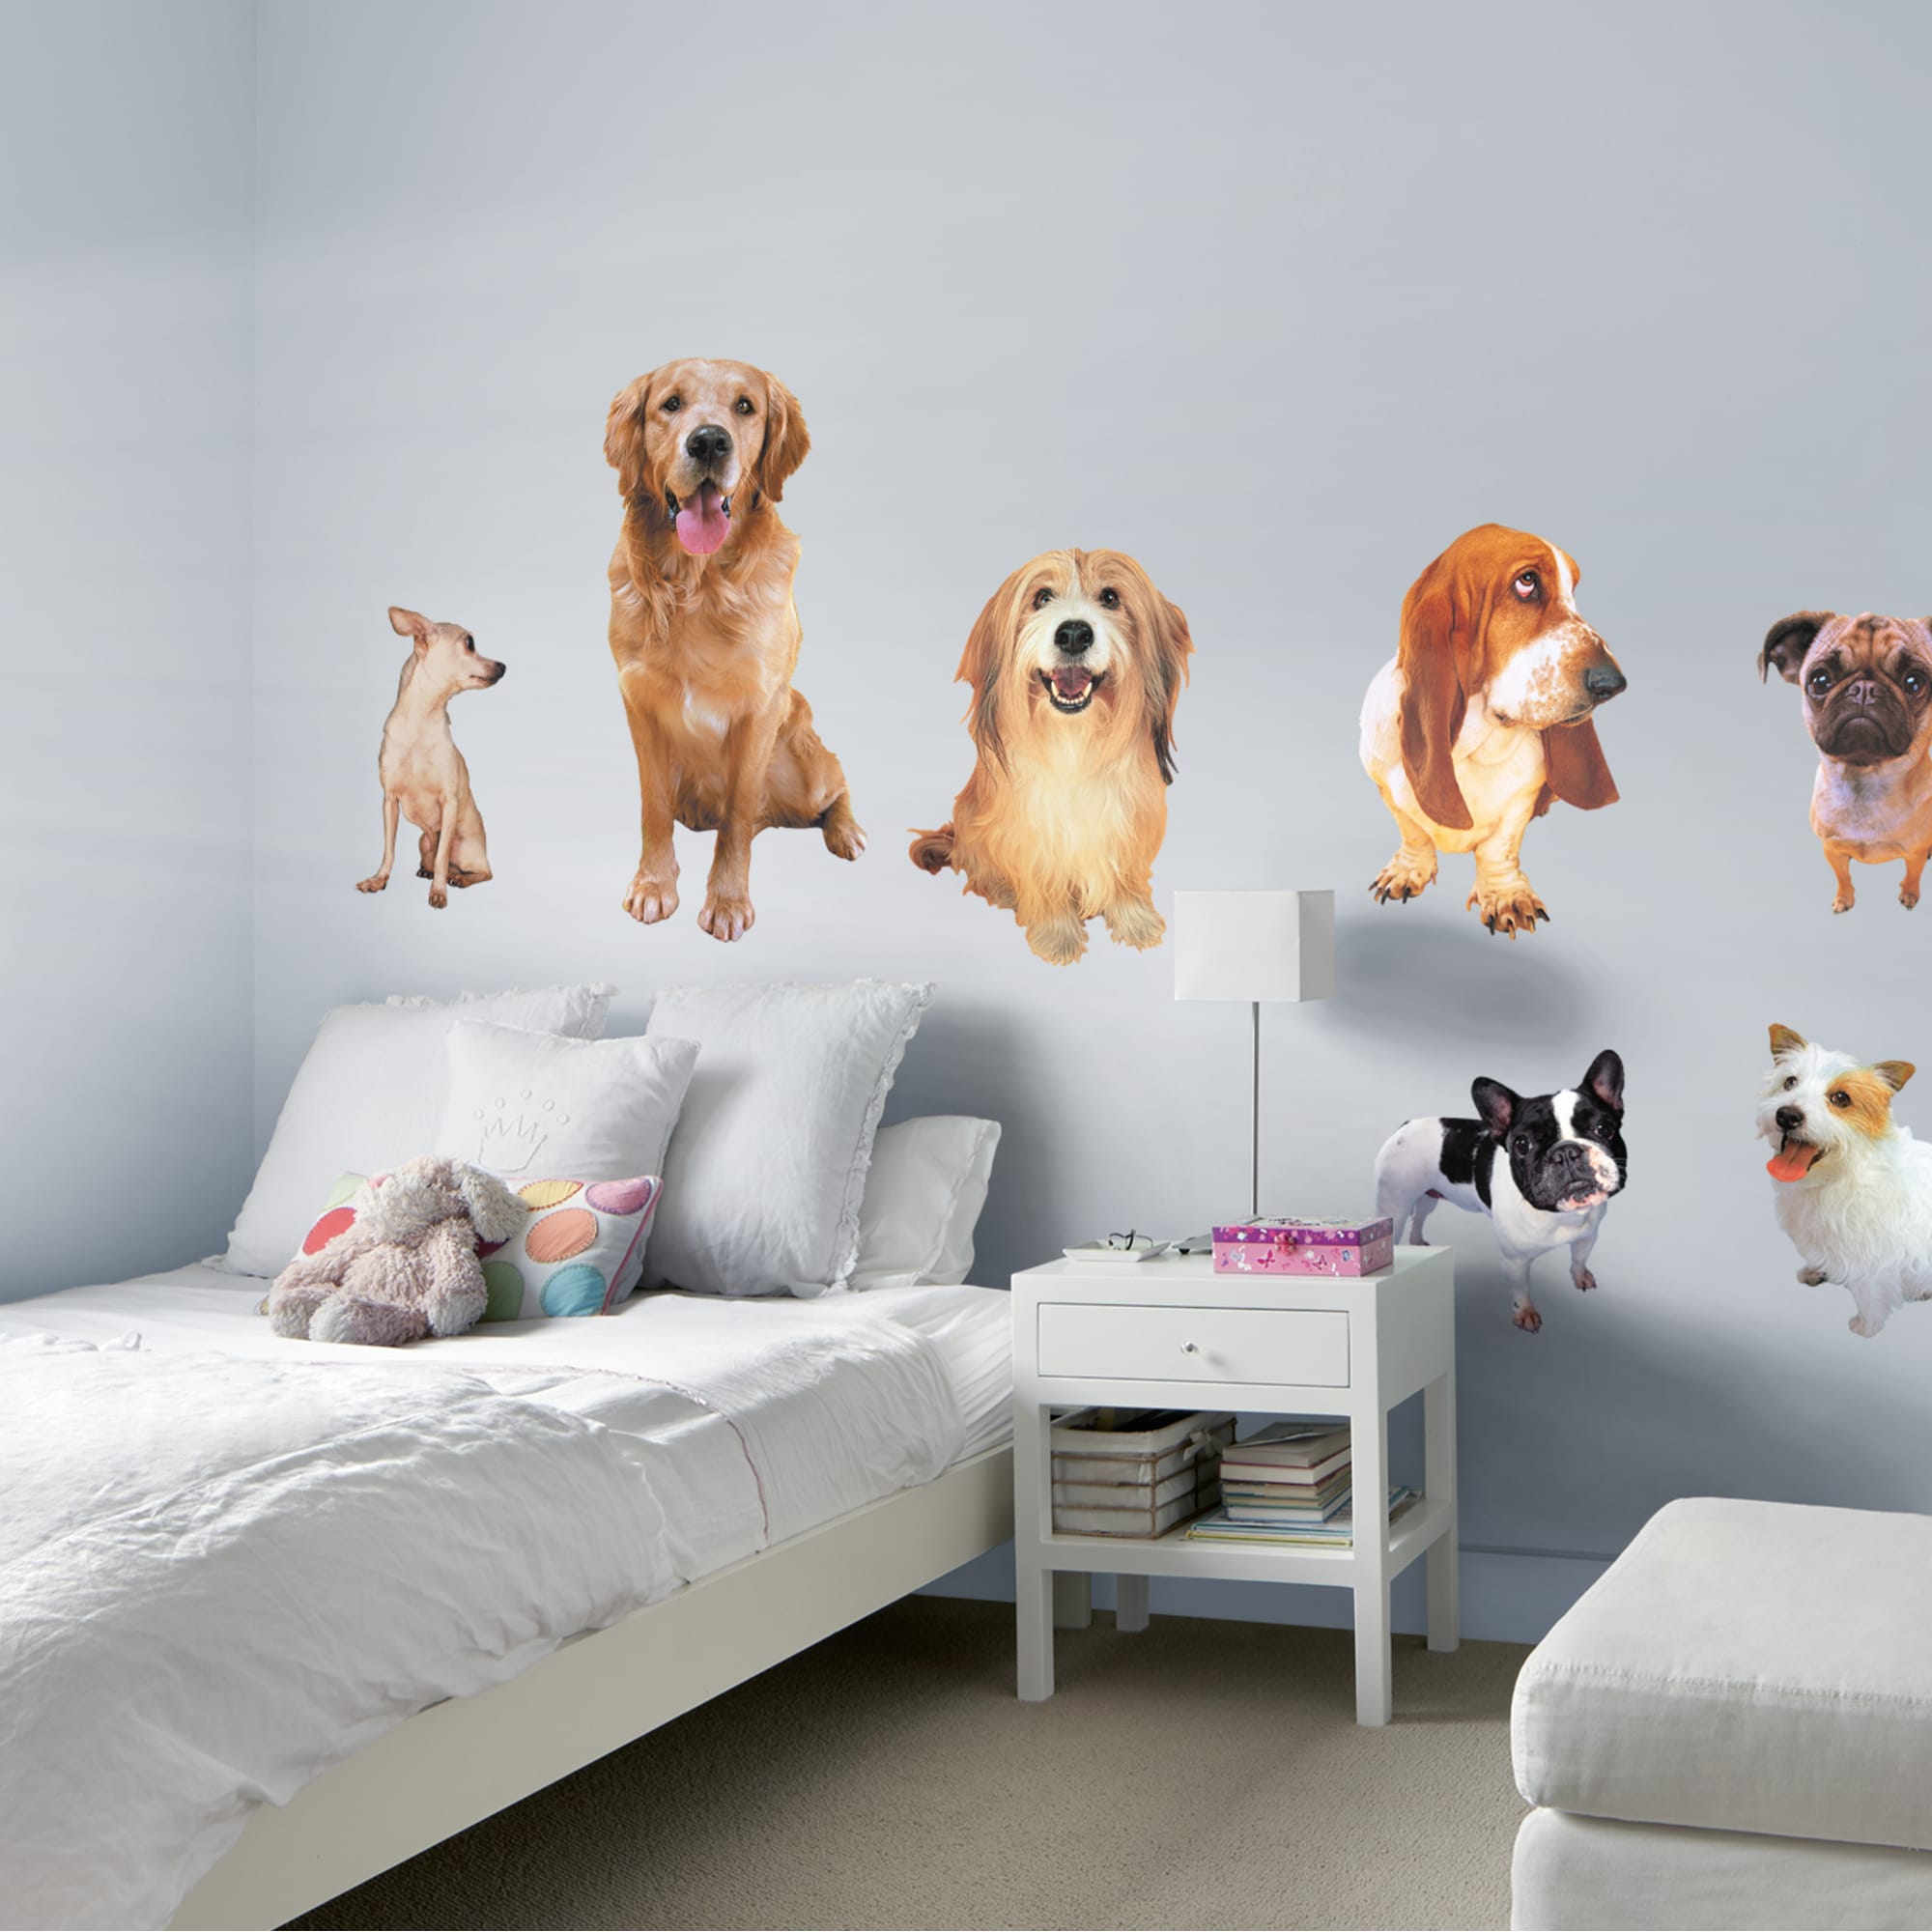 Dog Collection - Removable Vinyl Decals 52.0"W x 39.5"H by Fathead